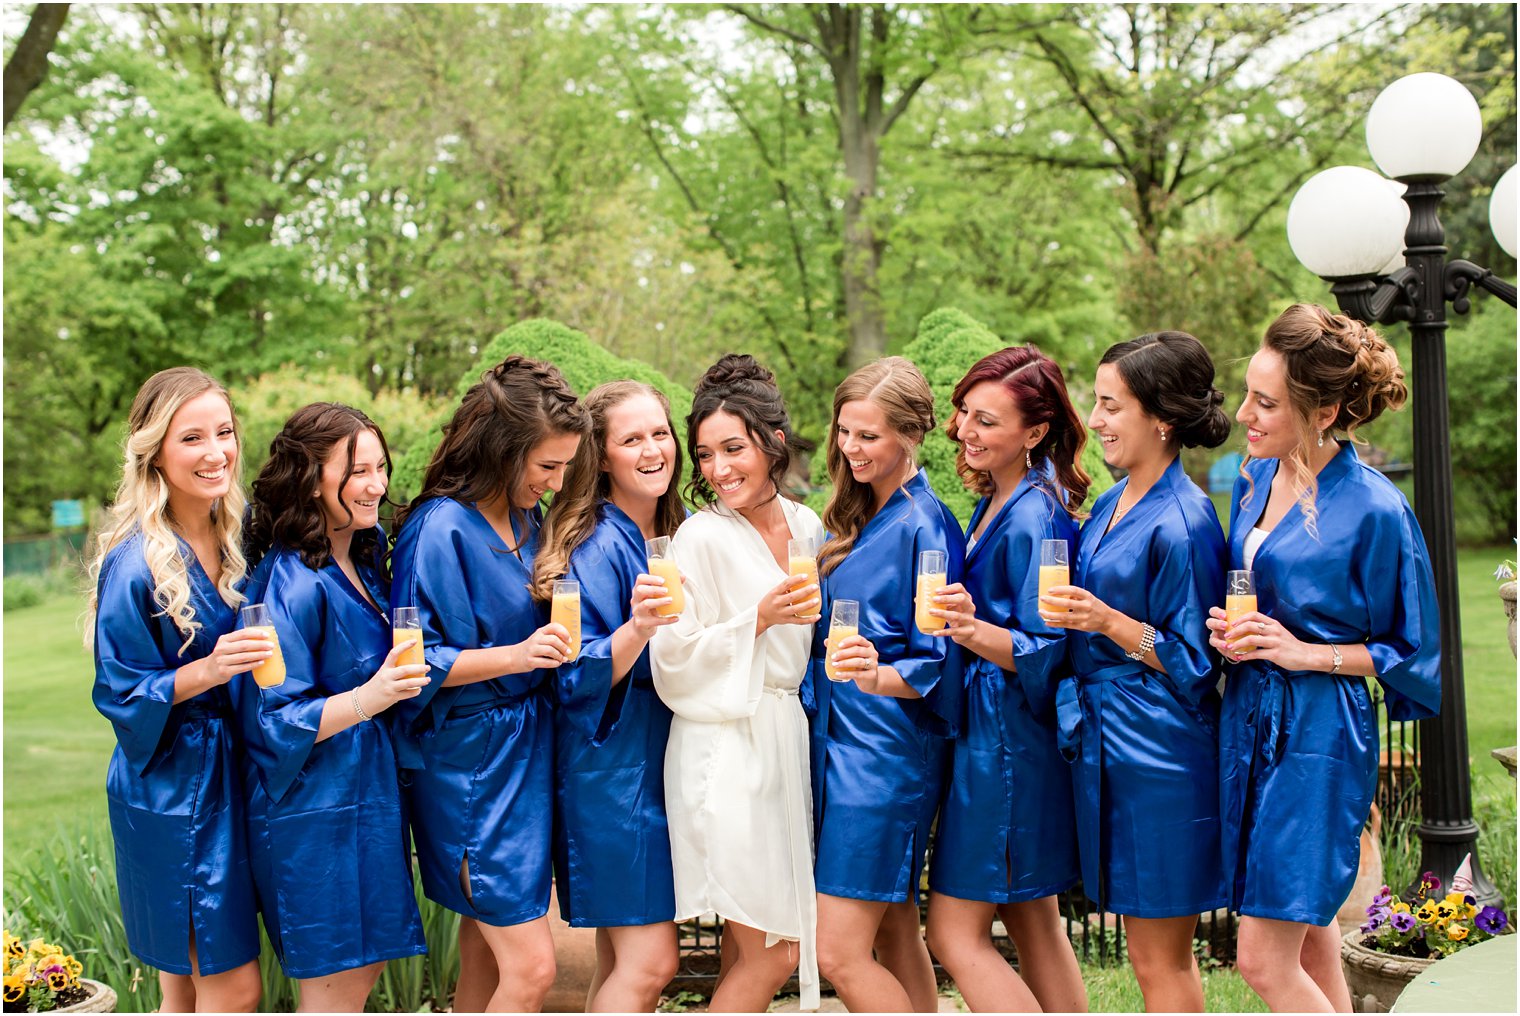 Bridesmaids in blue robes | Photos by Idalia Photography